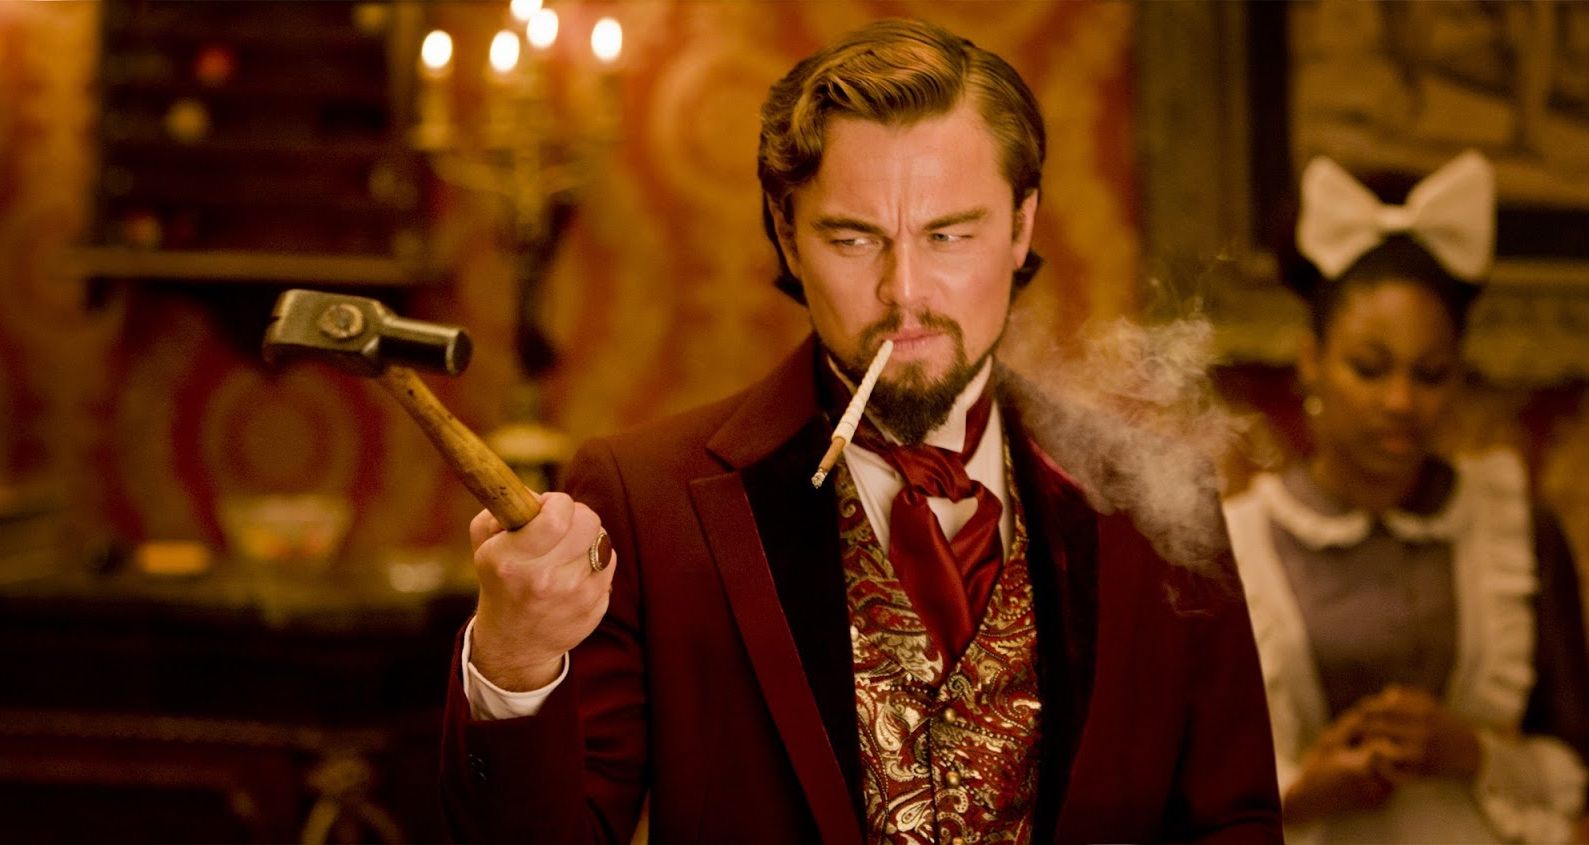 In Django Unchained, DiCaprio accidentally smashed a glass and sliced his hand. This was kept in the film.